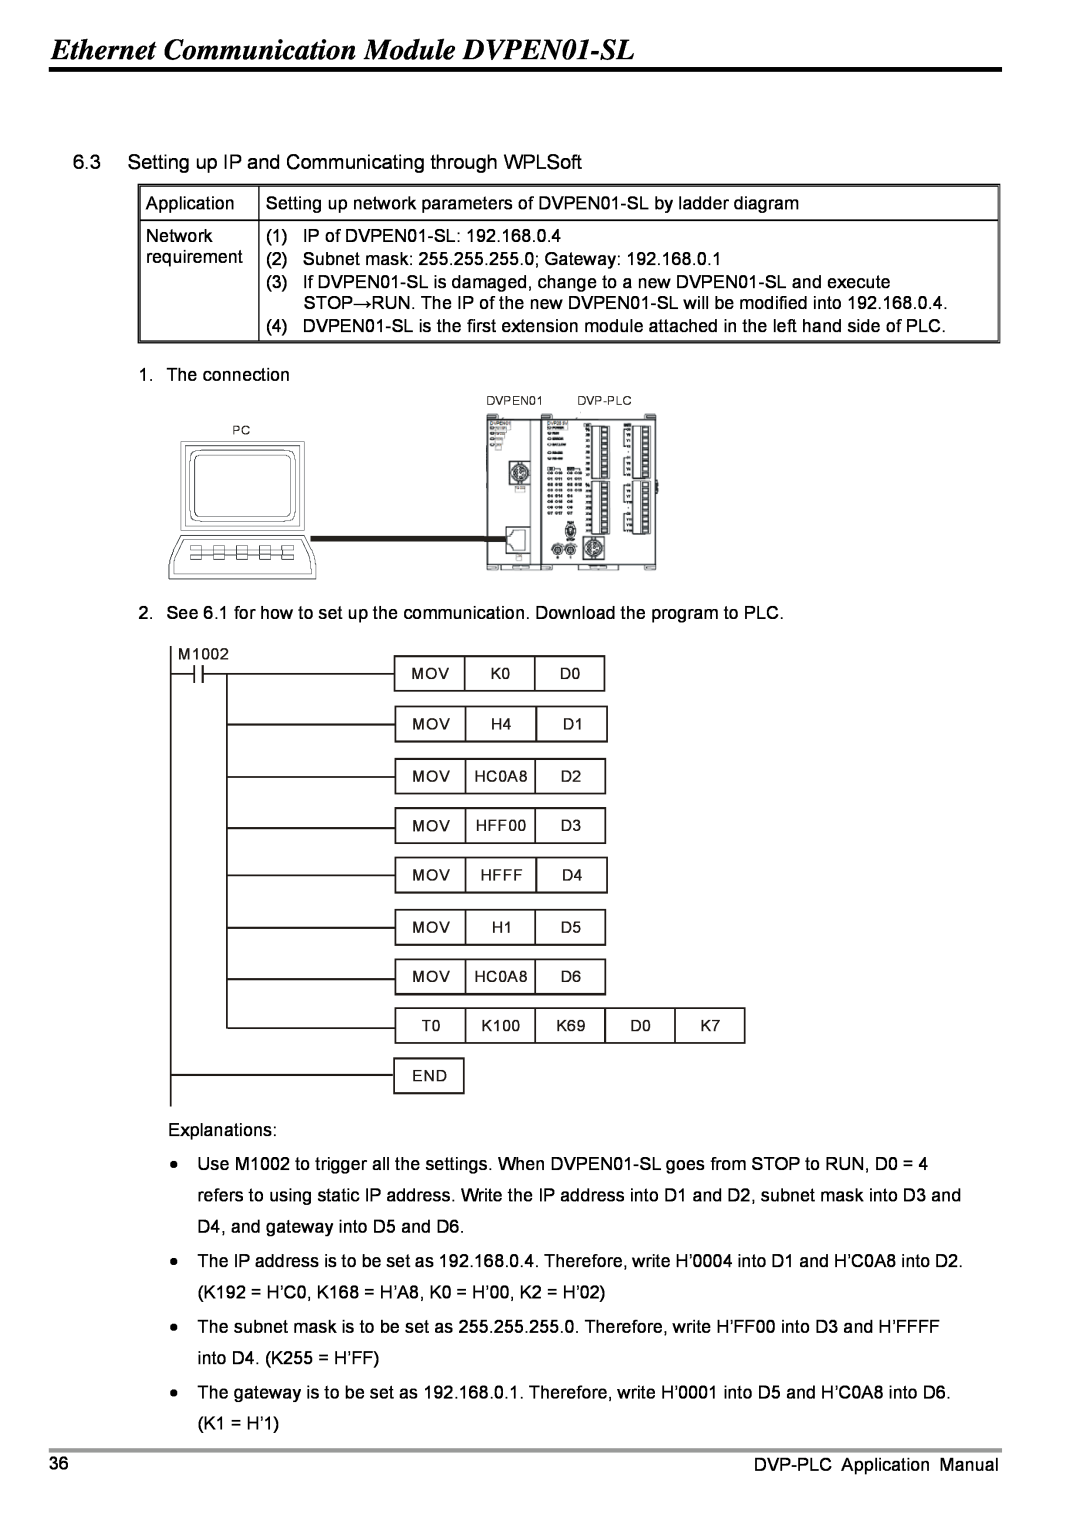 Delta Electronics manual Ethernet Communication Module DVPEN01-SL, Setting up IP and Communicating through WPLSoft, K100 